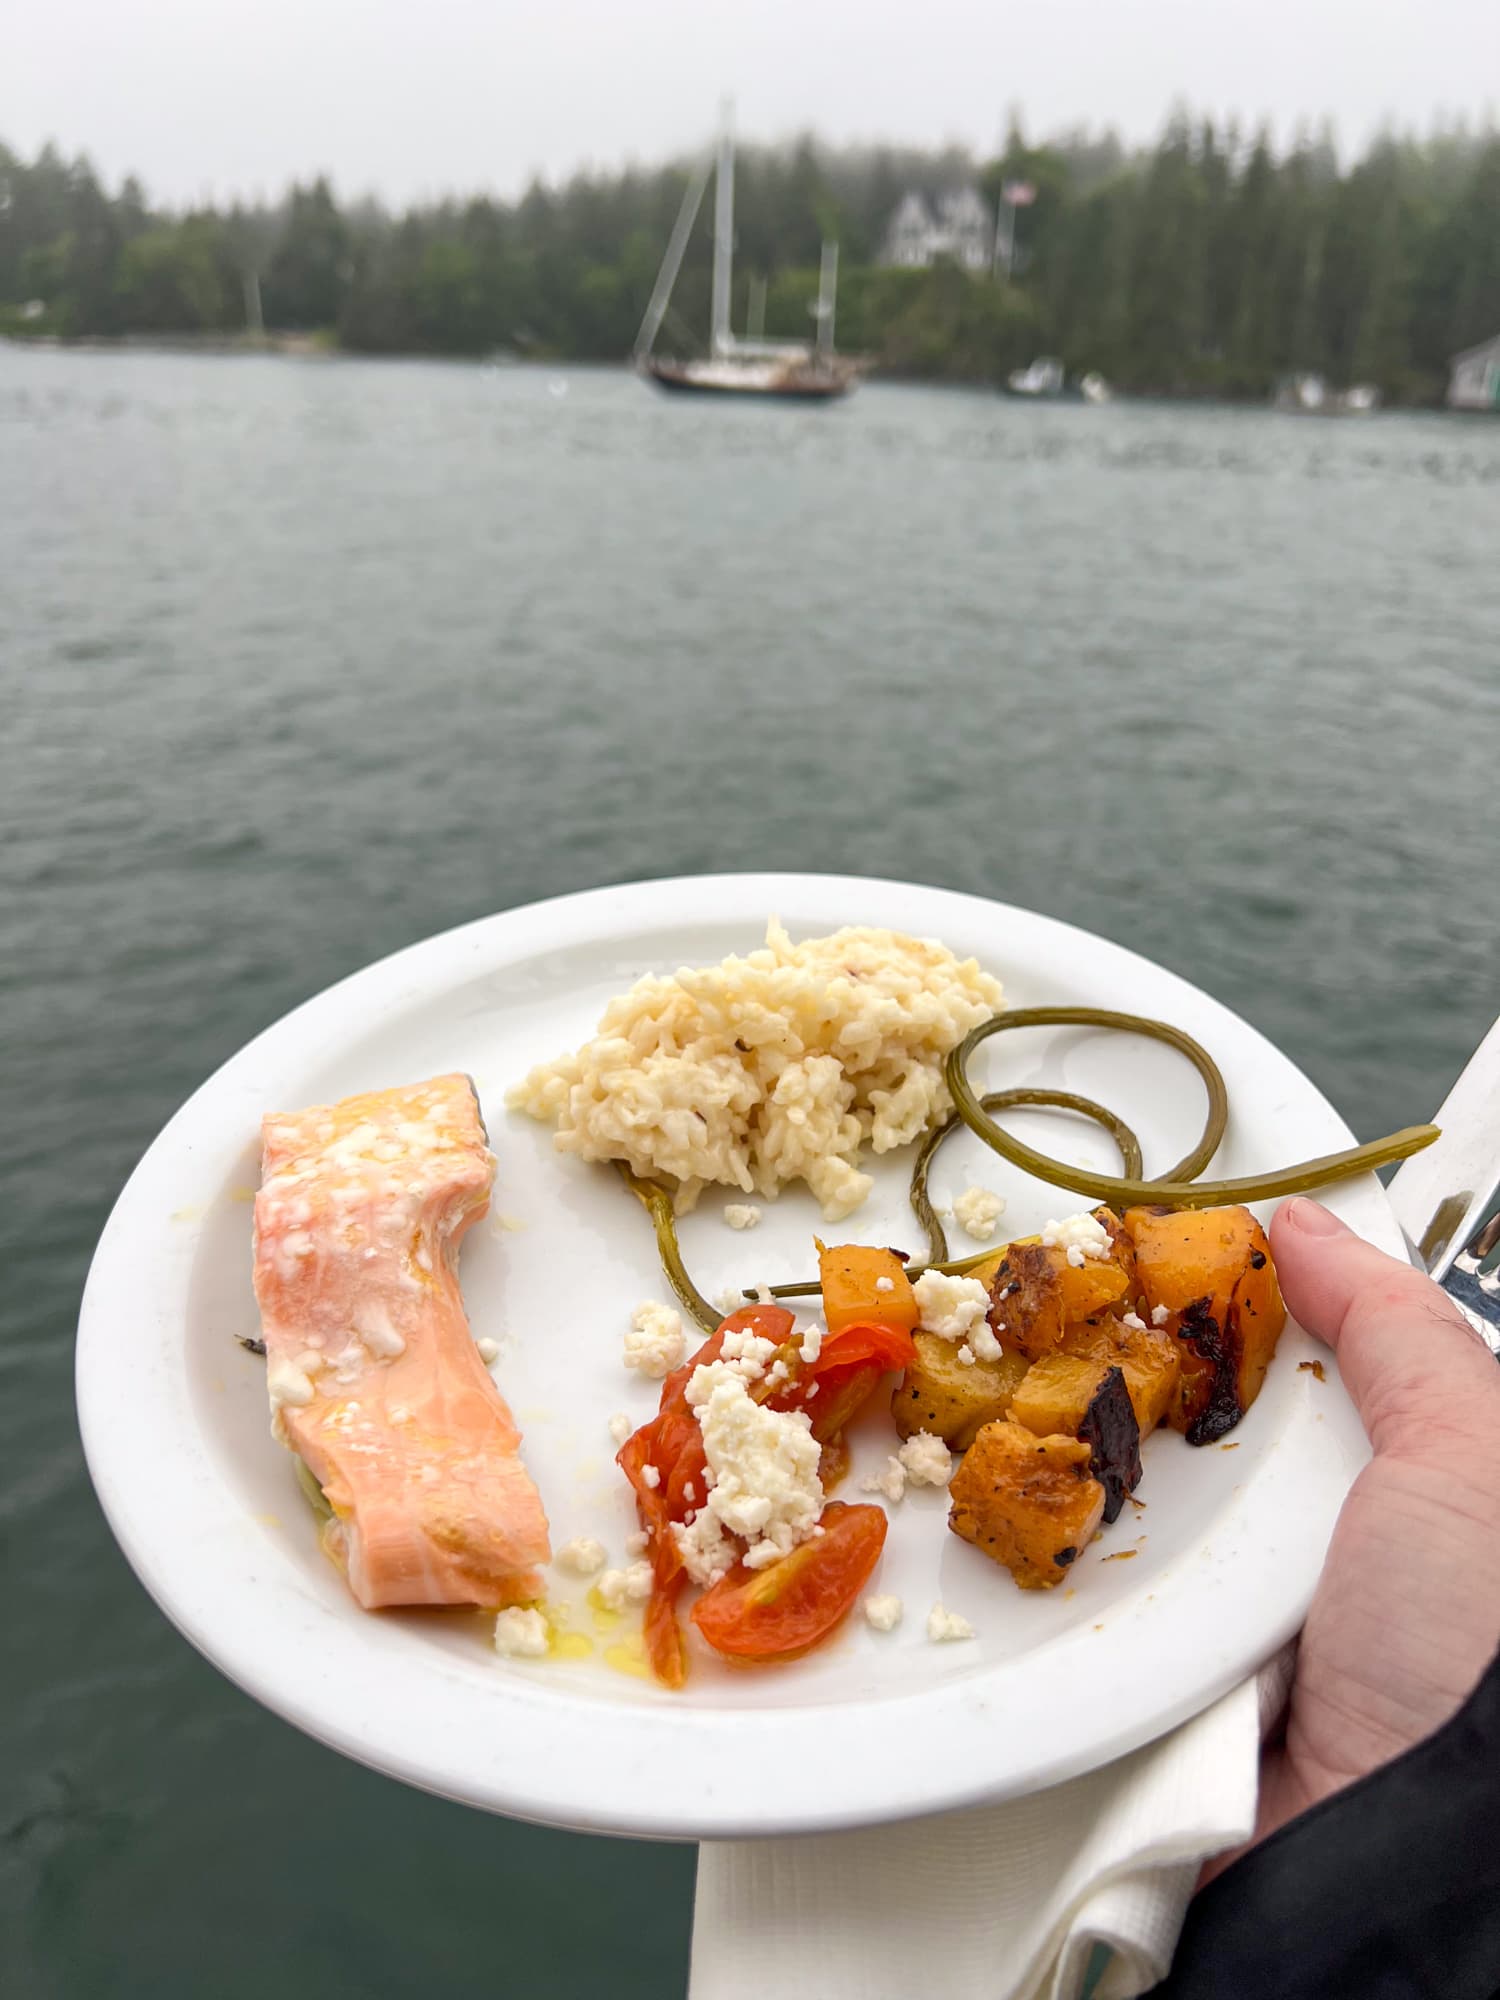 Salmon with lemon risotto on a J & E Riggin windjammer cruise in Maine